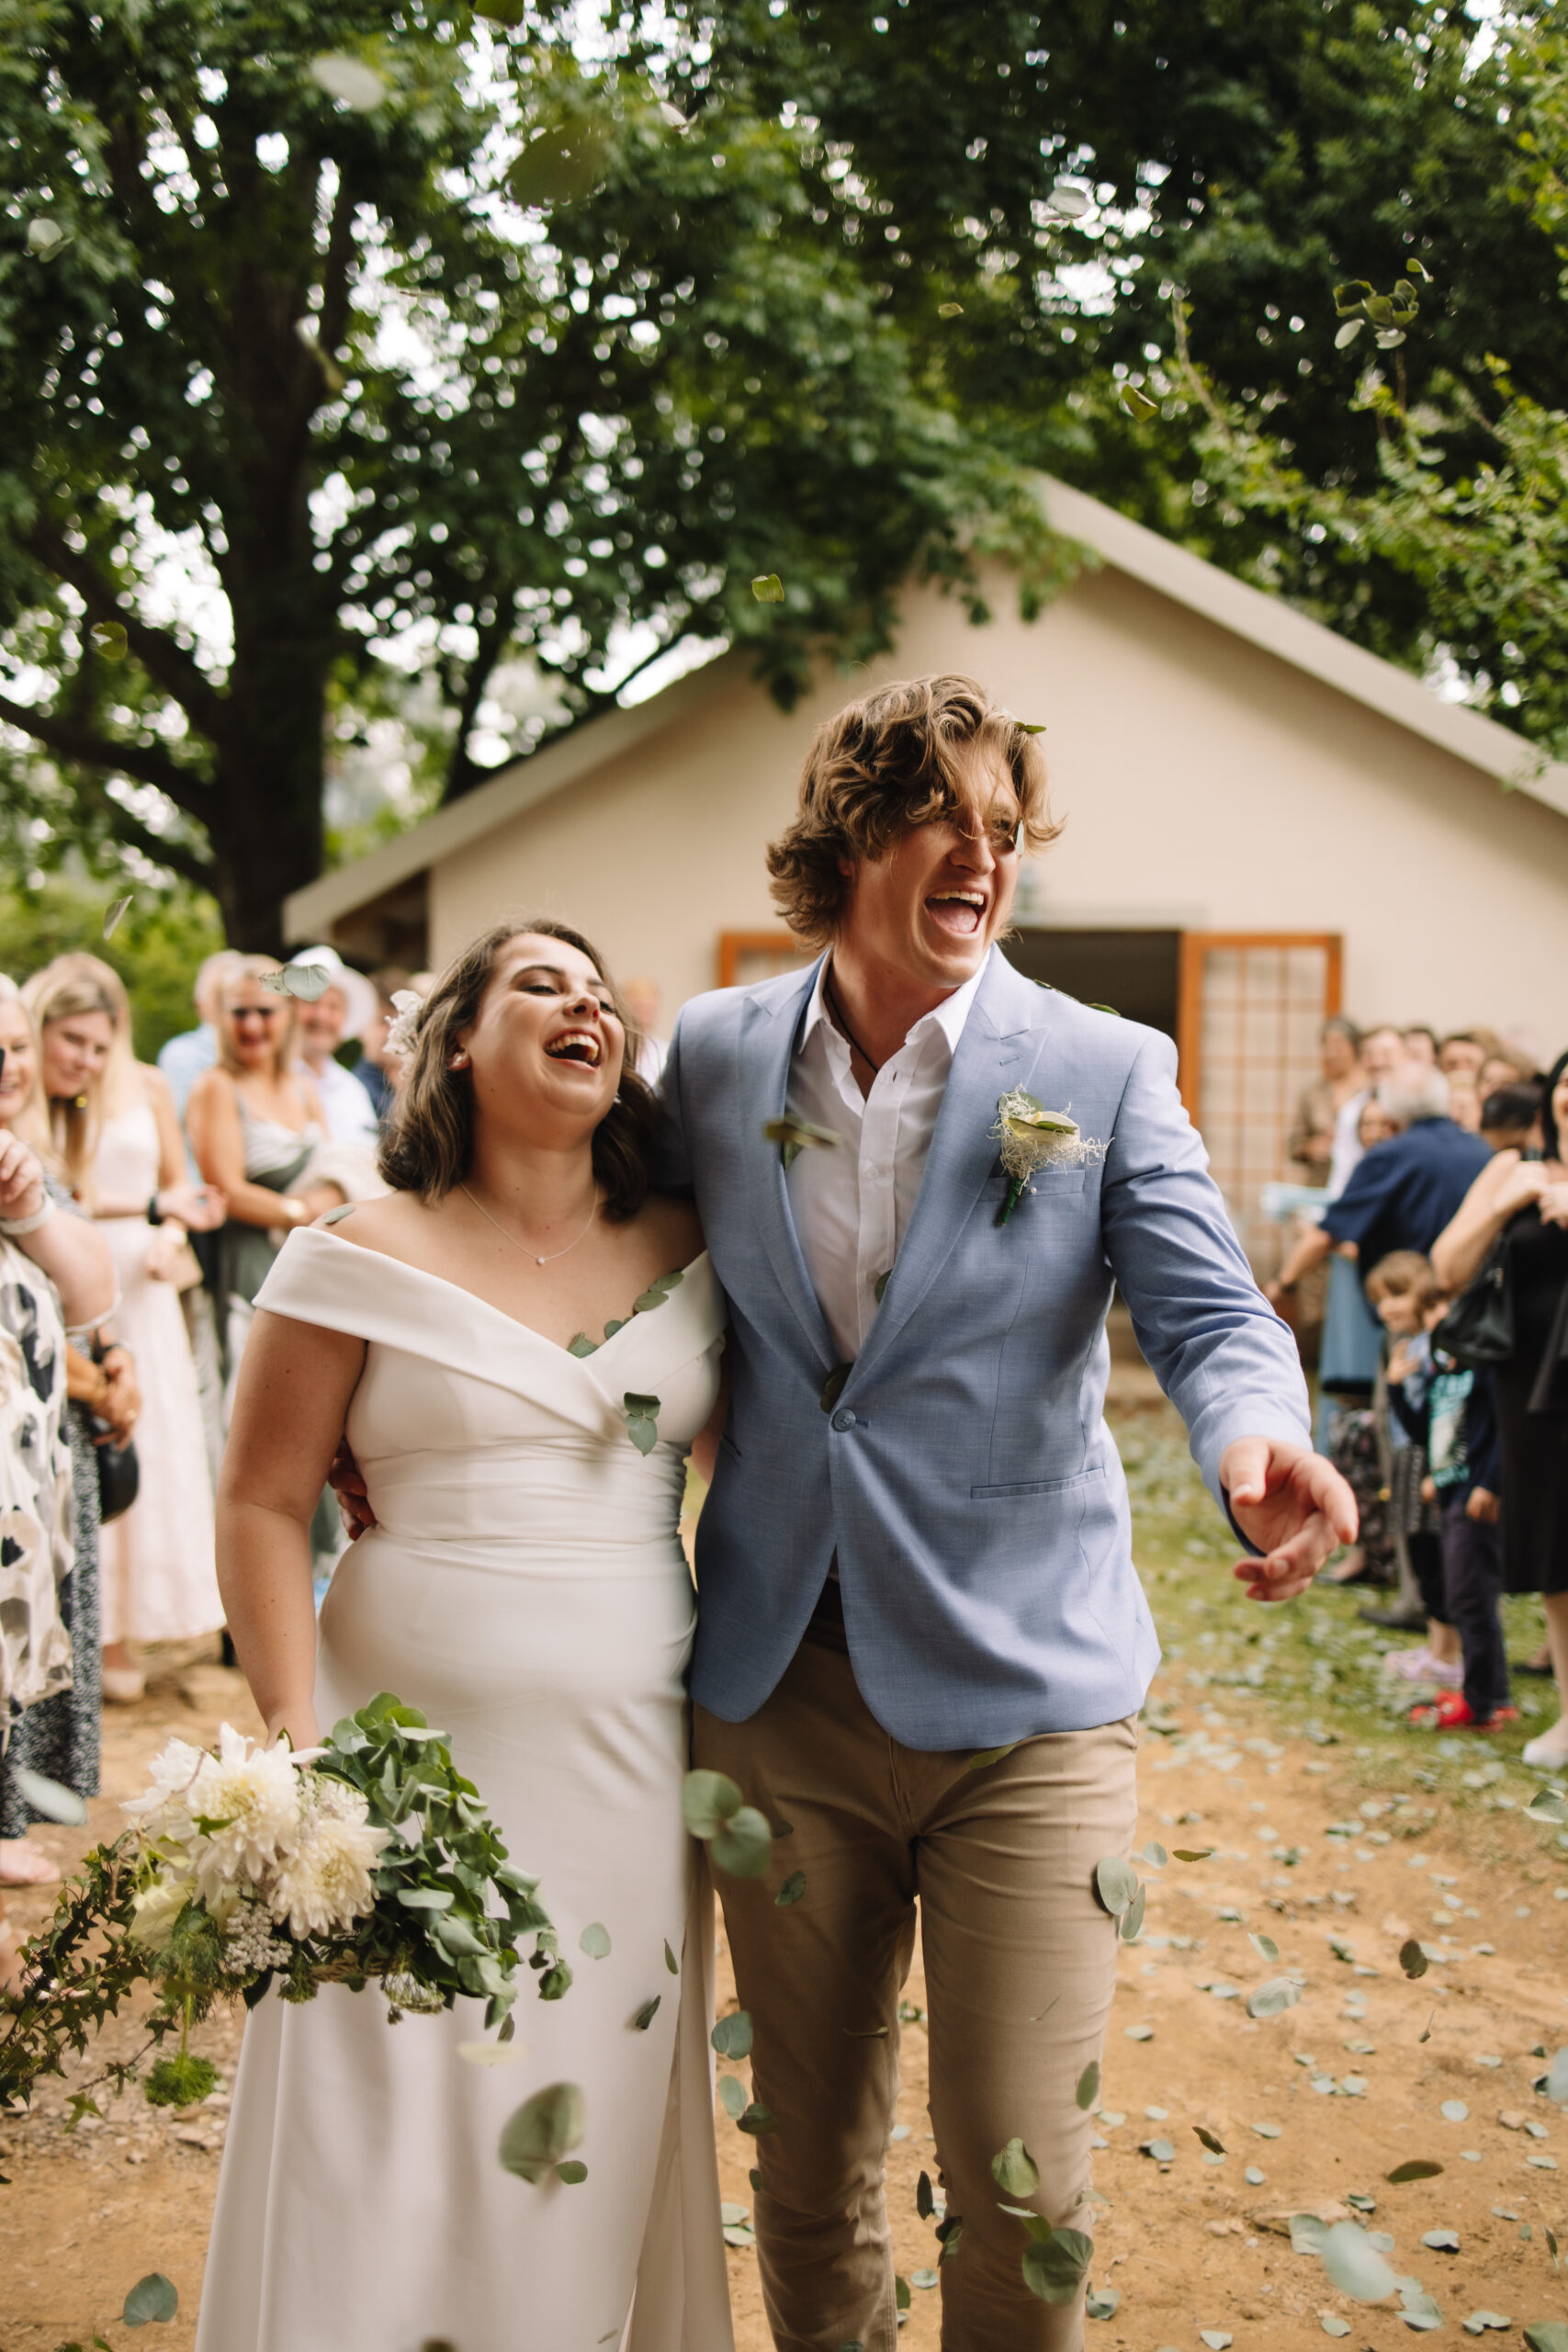 Bride and Groom walking back down the aisle while their guest throw eucalyptus confetti petals towards them